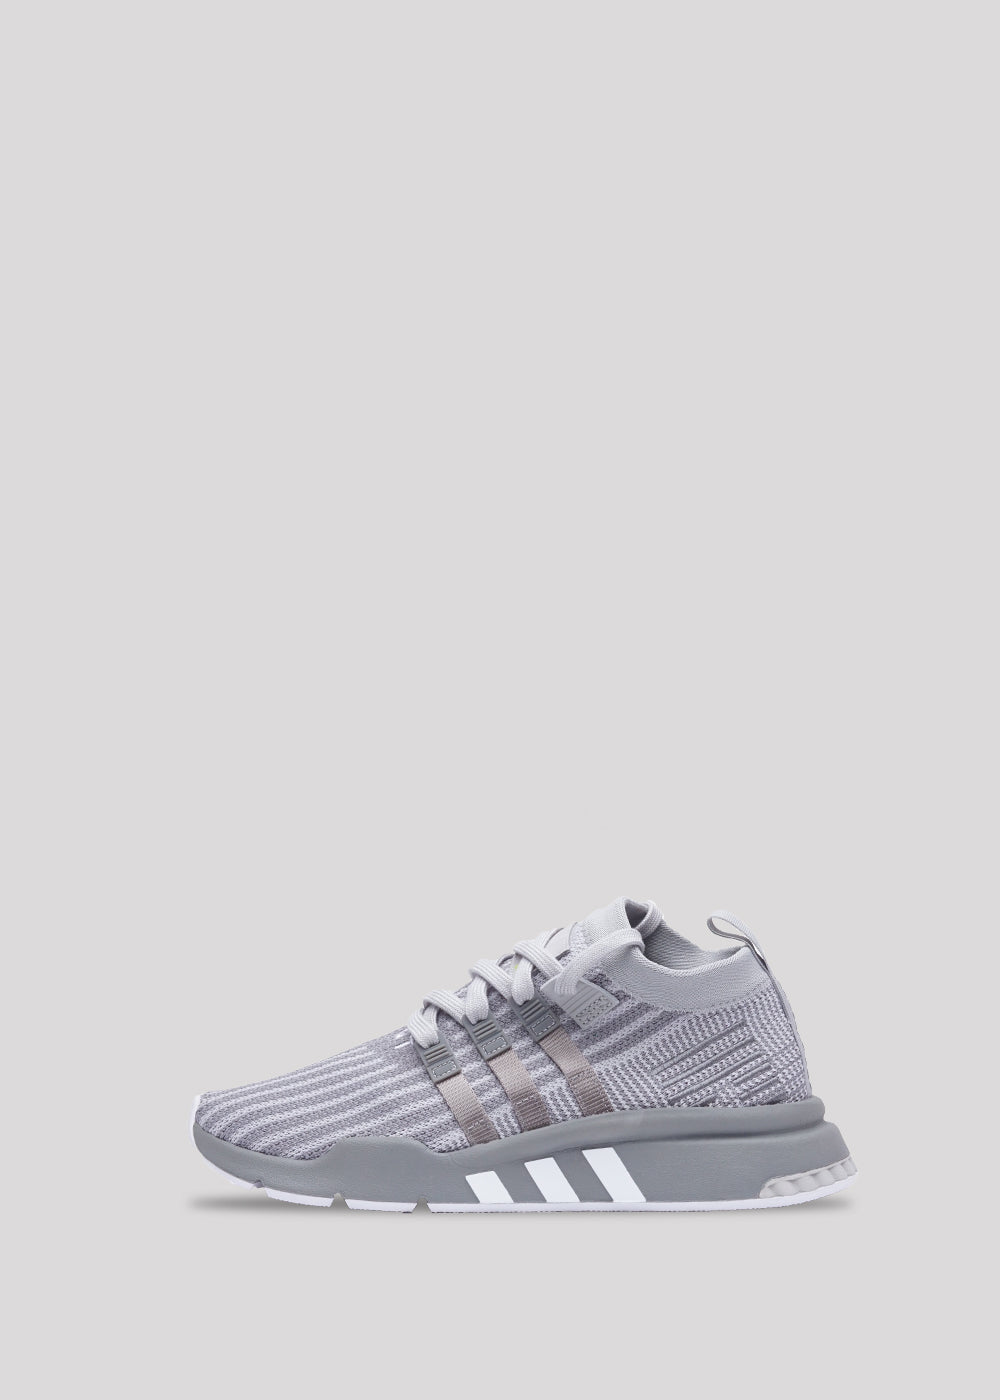 ADIDAS EQT SUPPORT MID ADV | SOLE PLAY 